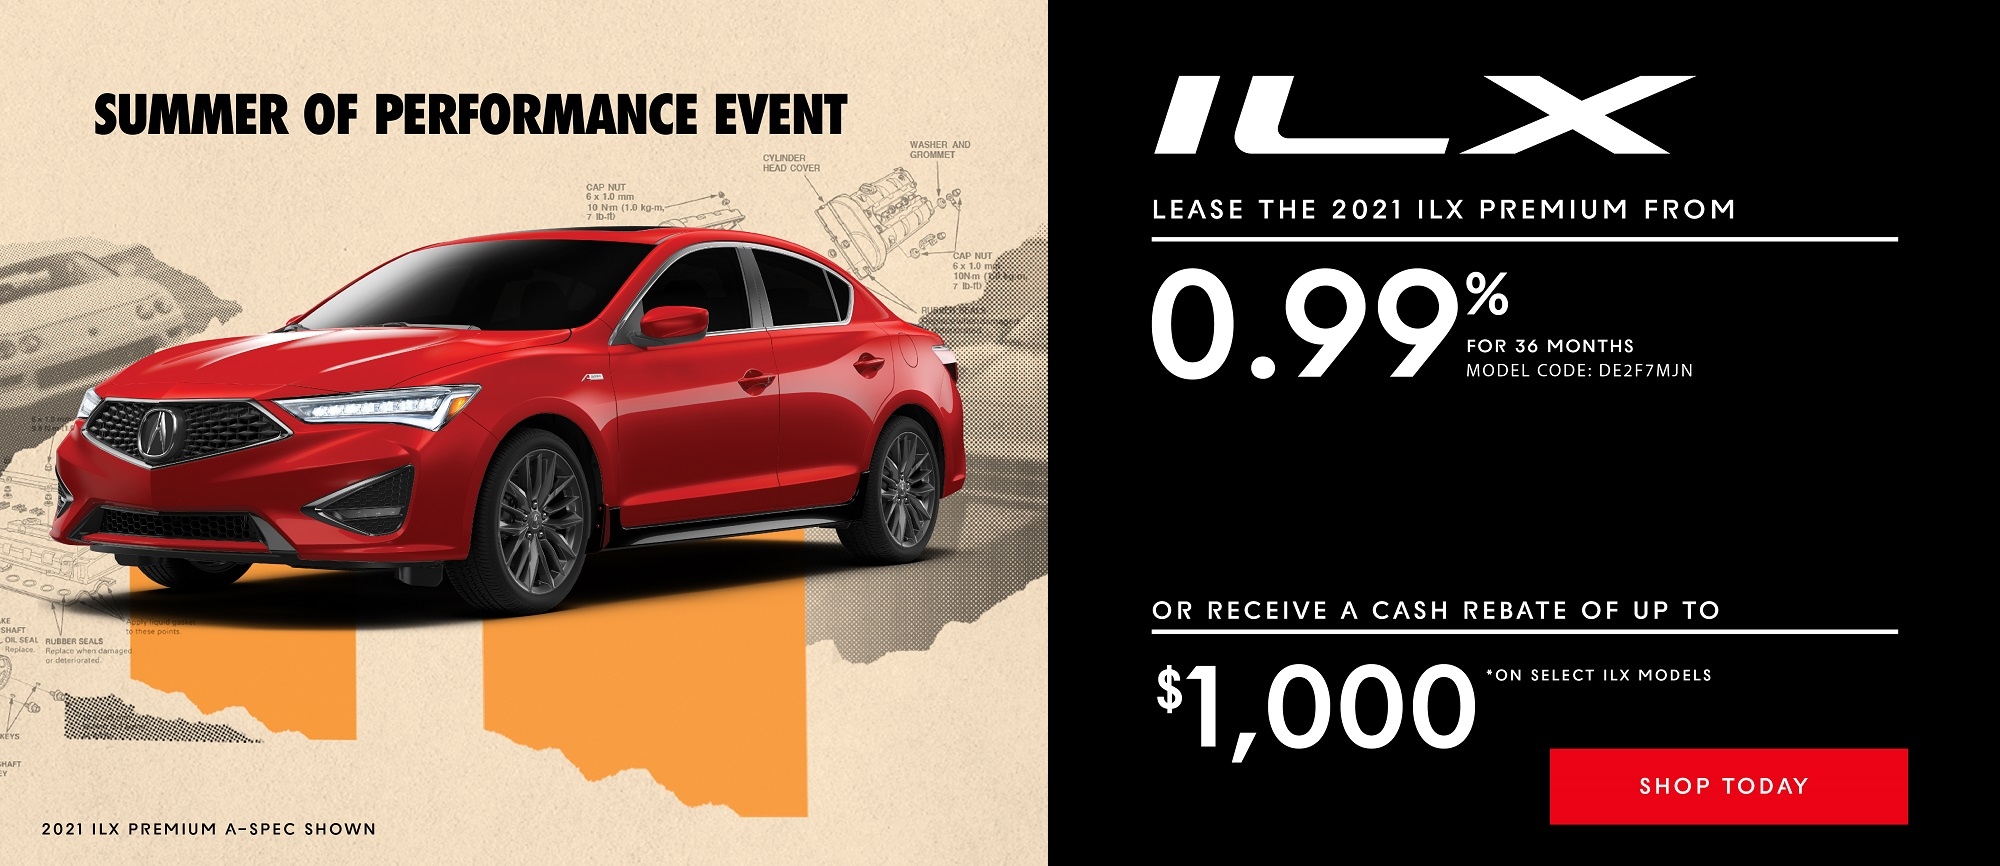 Acura Incentives And Rebates in Edmonton West Side Acura